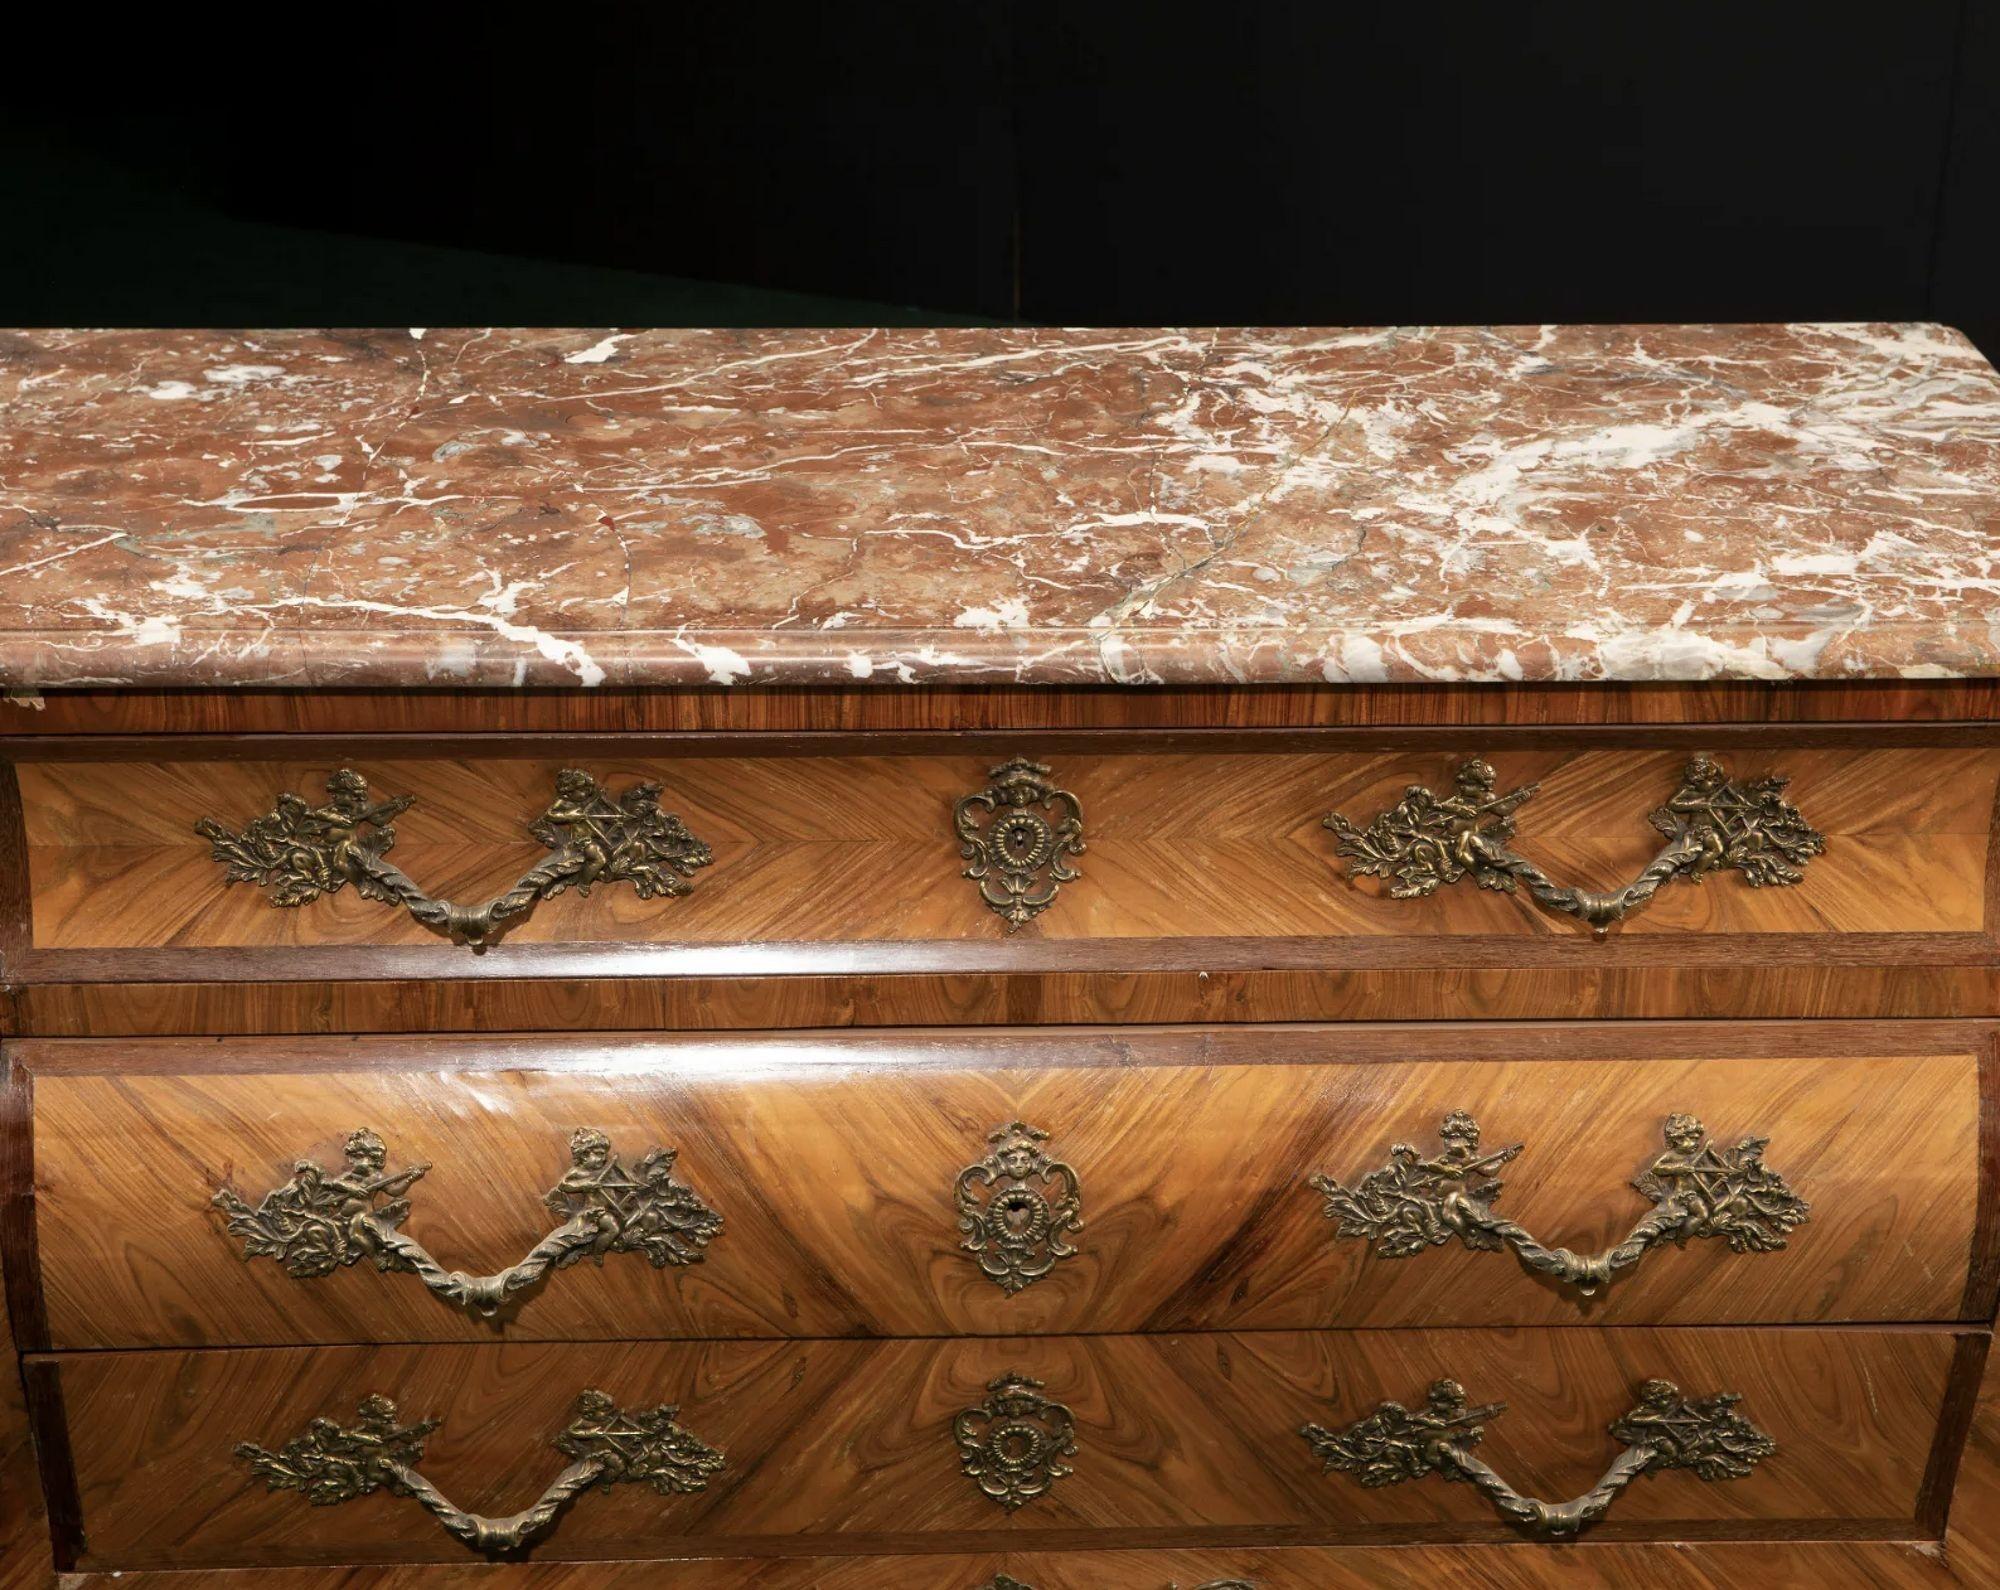 Late 19th century French Louis XV-style Bombe Commode
 
The book matched veneered chest with marble top over three drawers with bronze mounts and hardware
 
Dimensions:
 
33.75